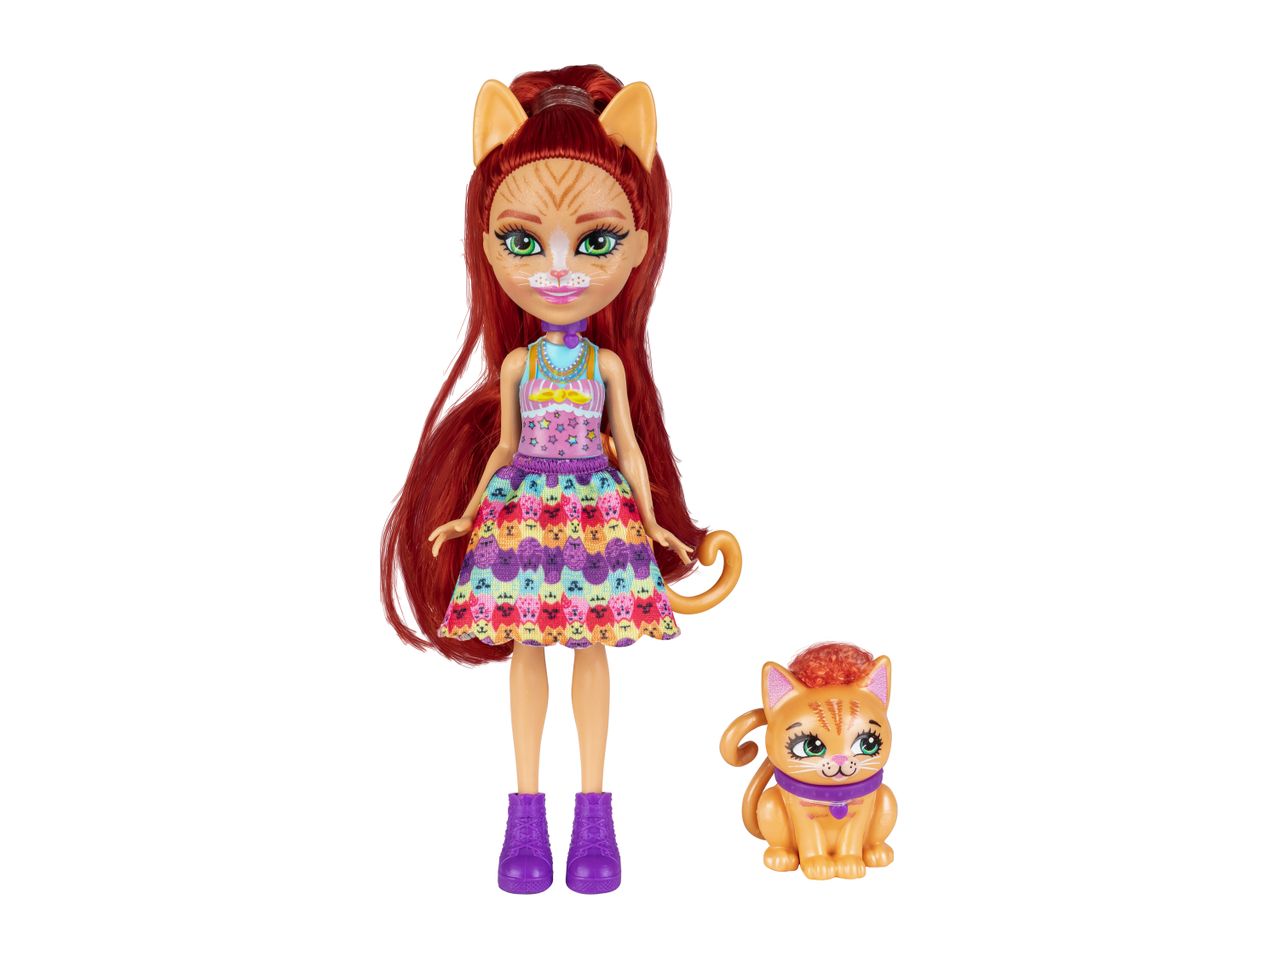 Go to full screen view: Enchantimals Doll - Image 1